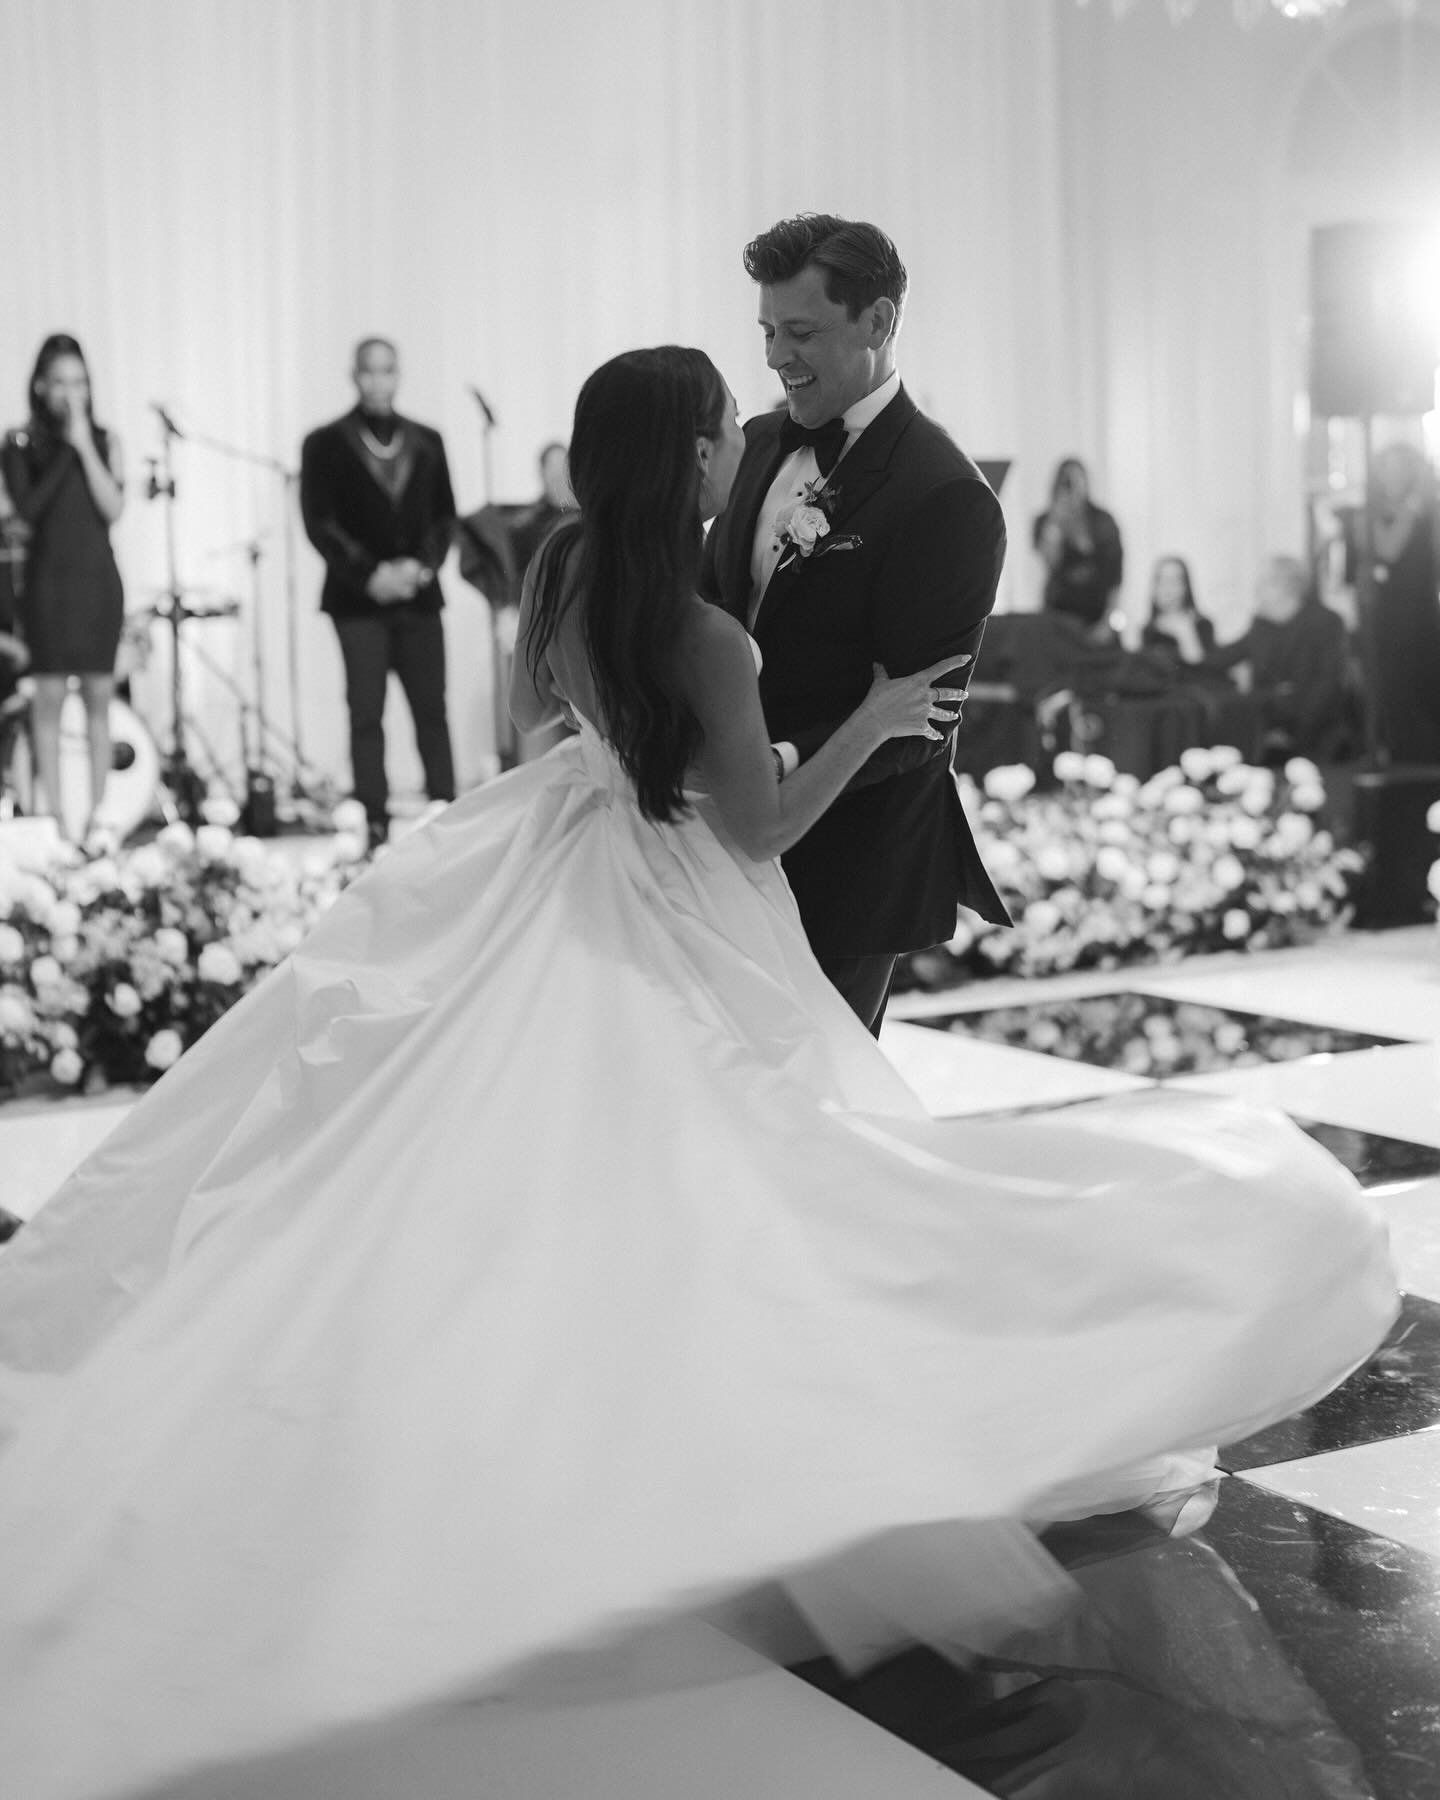 Dancing into the weekend and still dreaming about @allyckontos and @chrislkontos wedding. Their dance floor was pure fun all night long! 
#rosewoodmiramarbeach #wedding #dancing